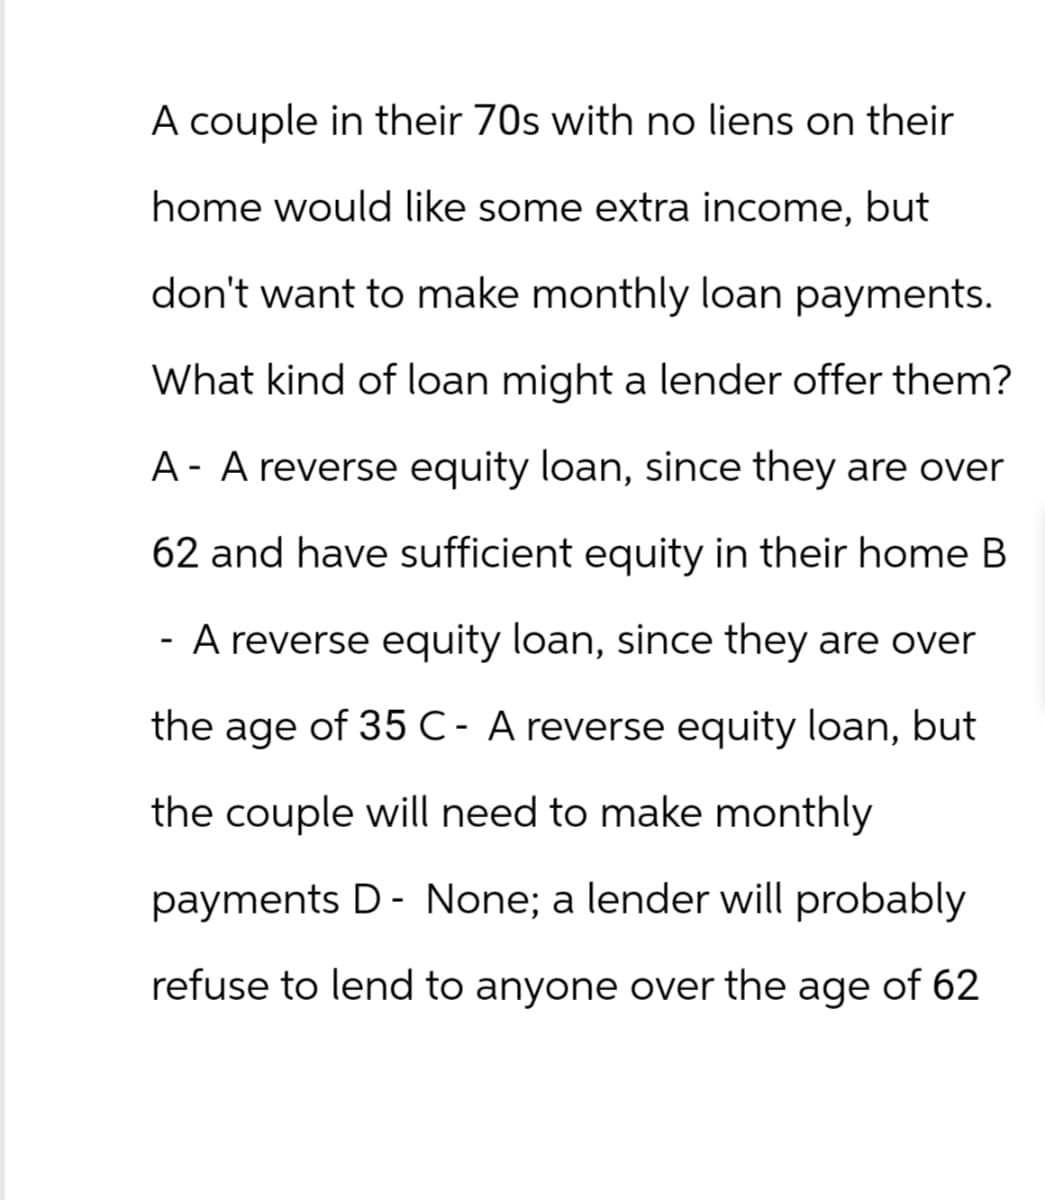 A couple in their 70s with no liens on their
home would like some extra income, but
don't want to make monthly loan payments.
What kind of loan might a lender offer them?
A- A reverse equity loan, since they are over
62 and have sufficient equity in their home B
A reverse equity loan, since they are over
the age of 35 C- A reverse equity loan, but
the couple will need to make monthly
payments D - None; a lender will probably
refuse to lend to anyone over the age of 62
-